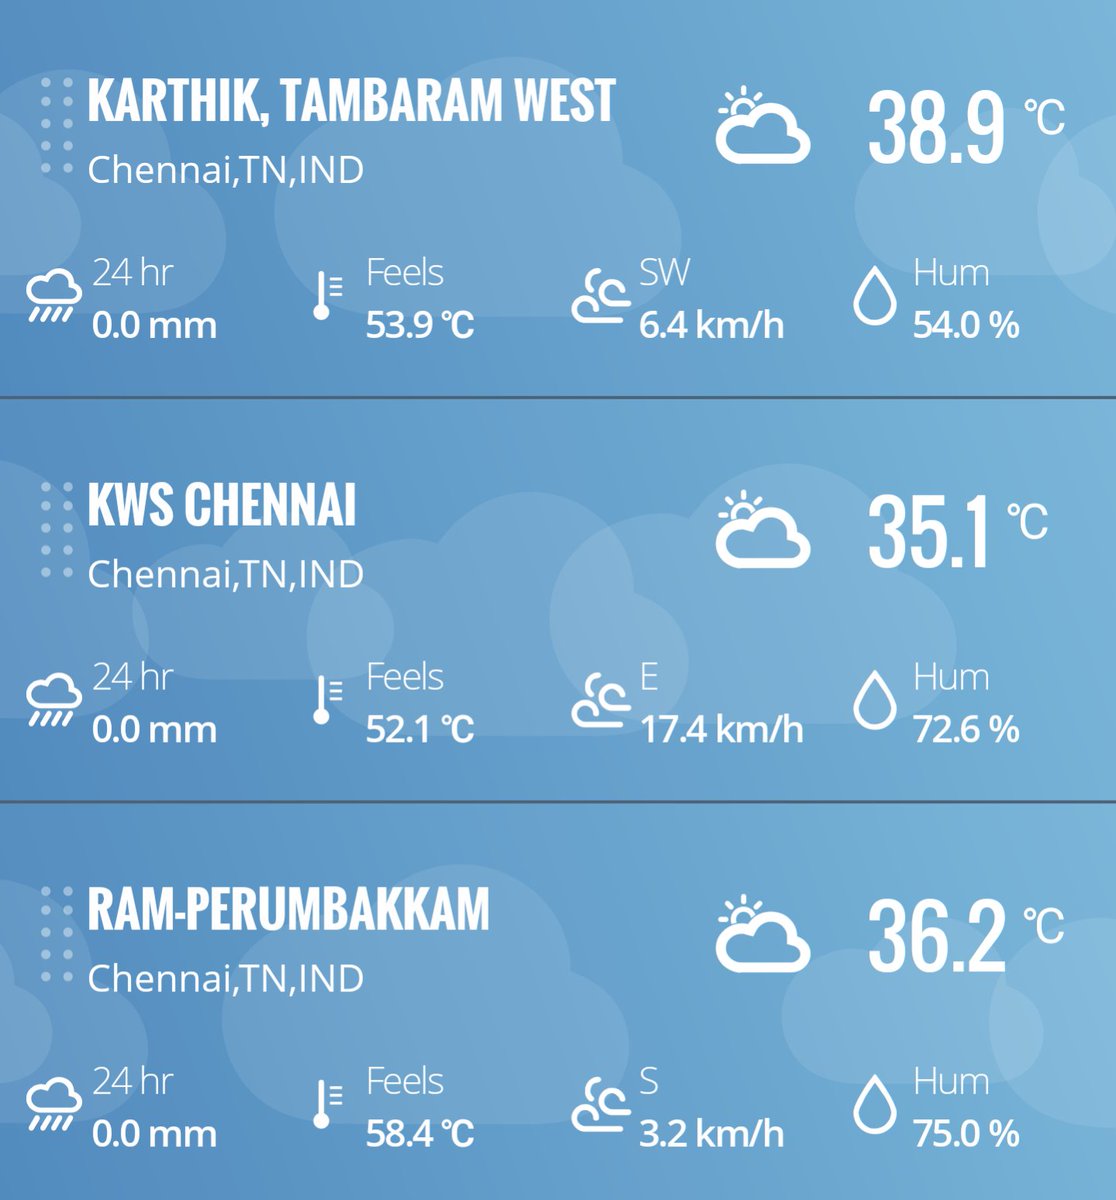 Look at the real feel readings in a place where sea Breeze hasn't reached yet (Tambaram), just reached (Perumbakkam), reached a while ago (Nungambakkam).